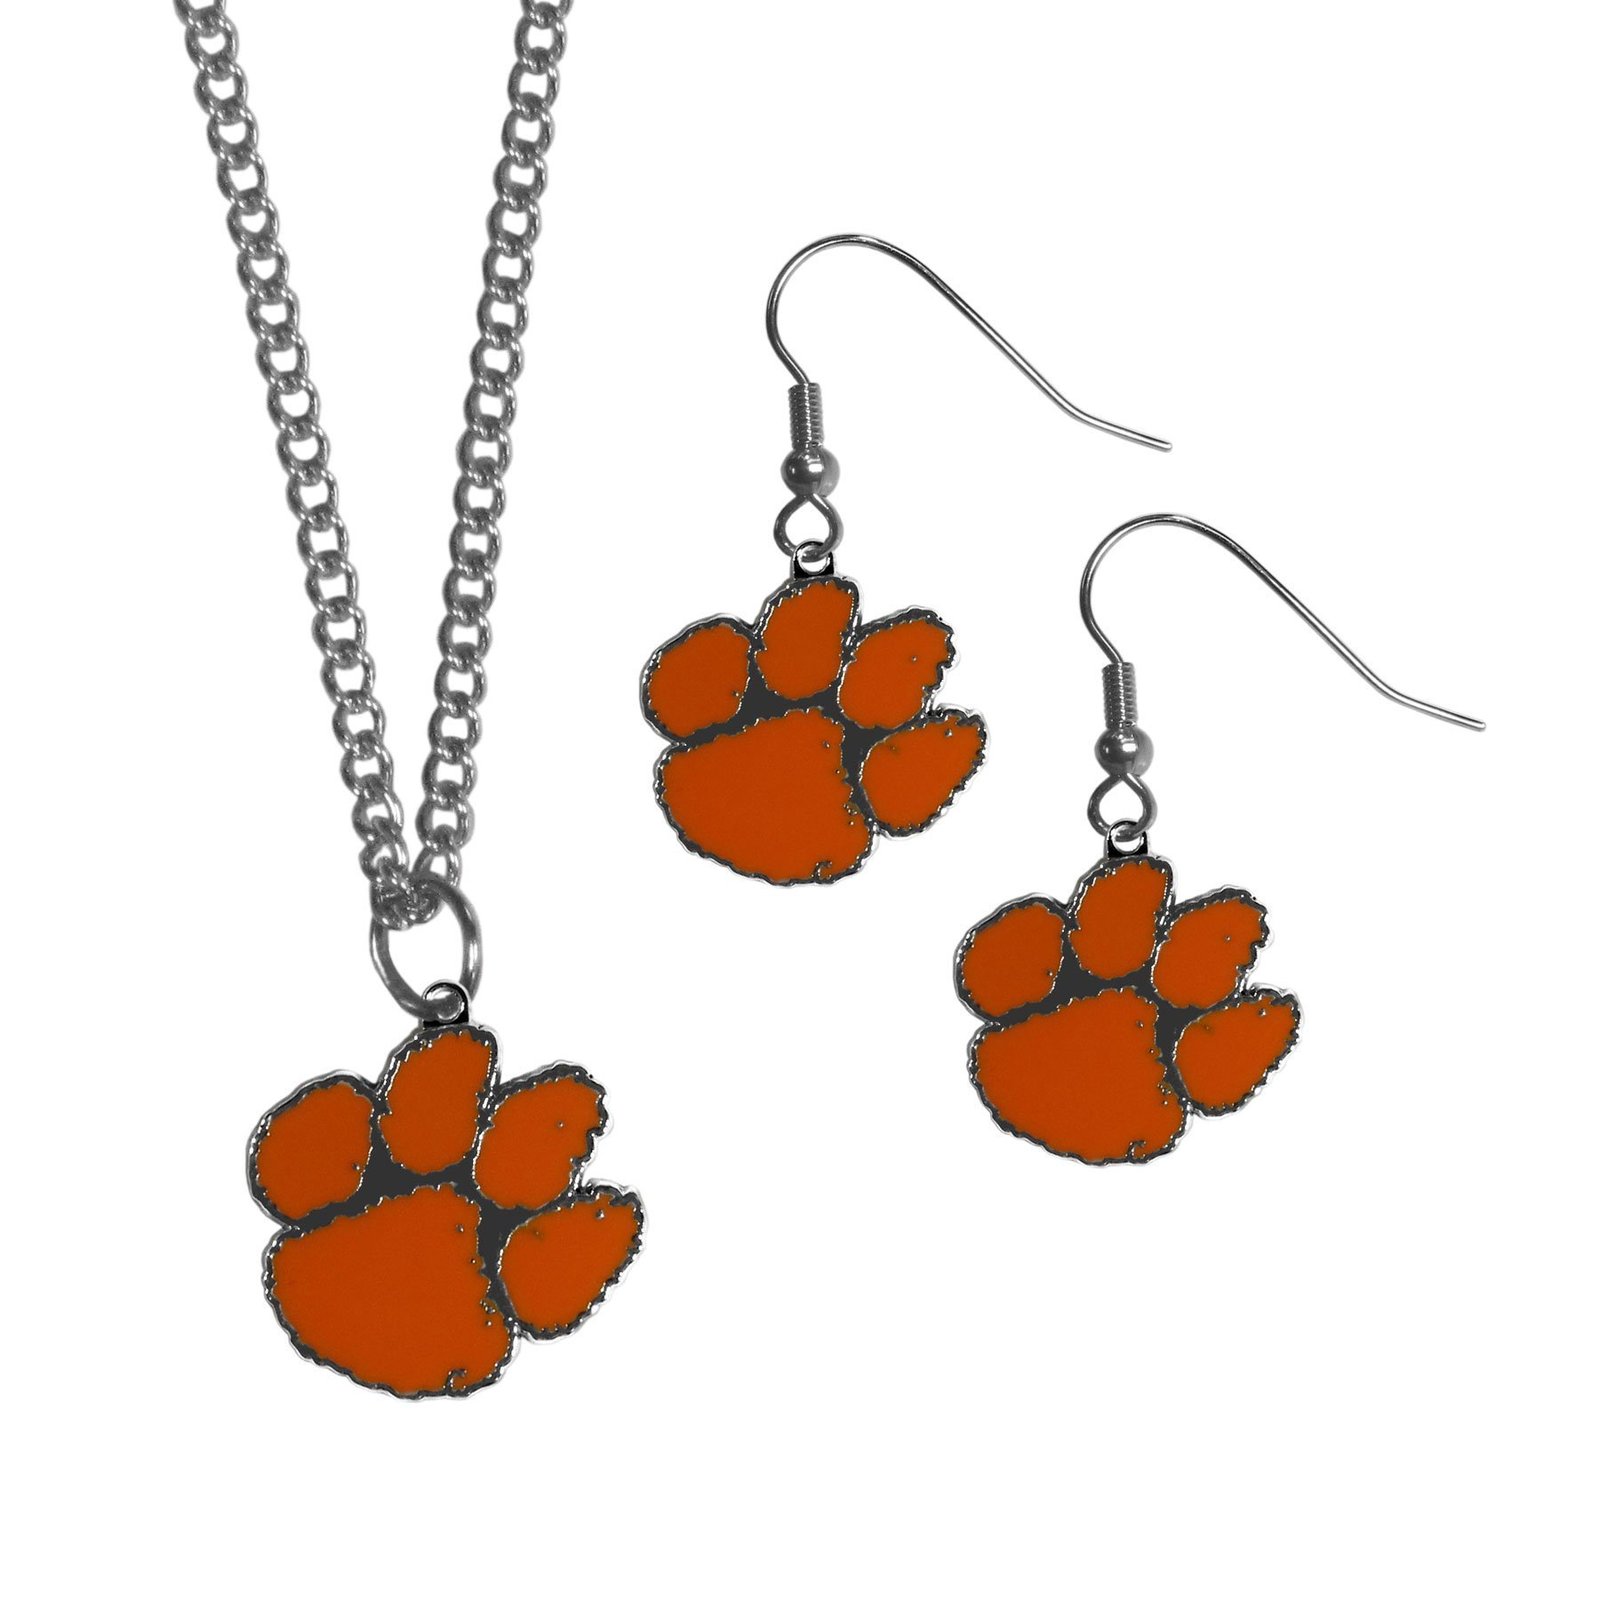 NCAA - Clemson Tigers Dangle Earrings and Chain Necklace Set  - $10.99